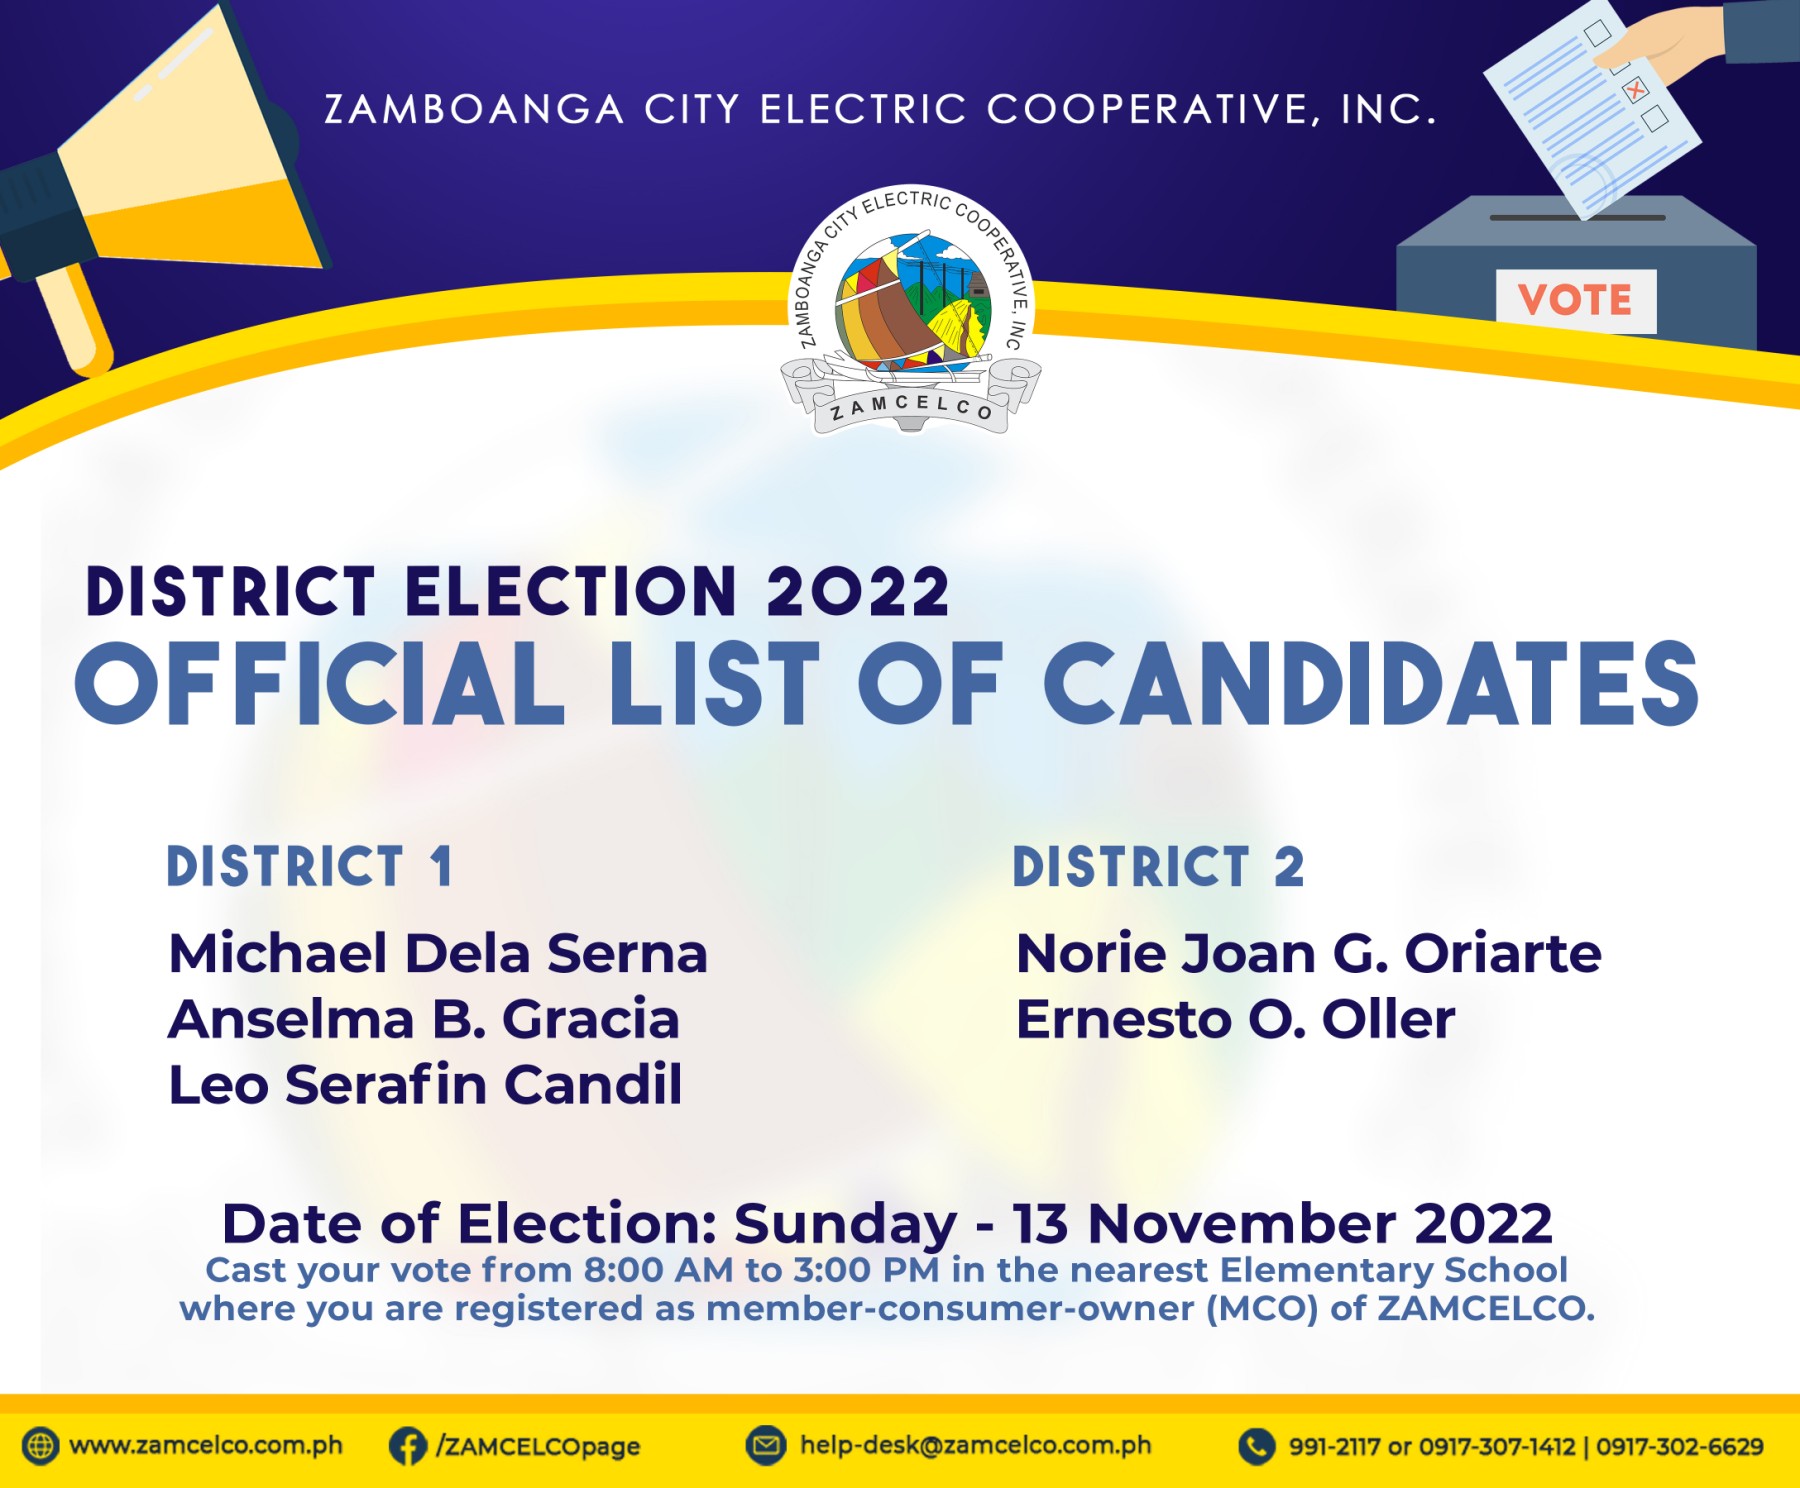 District Election 2022: District 1 and District 2